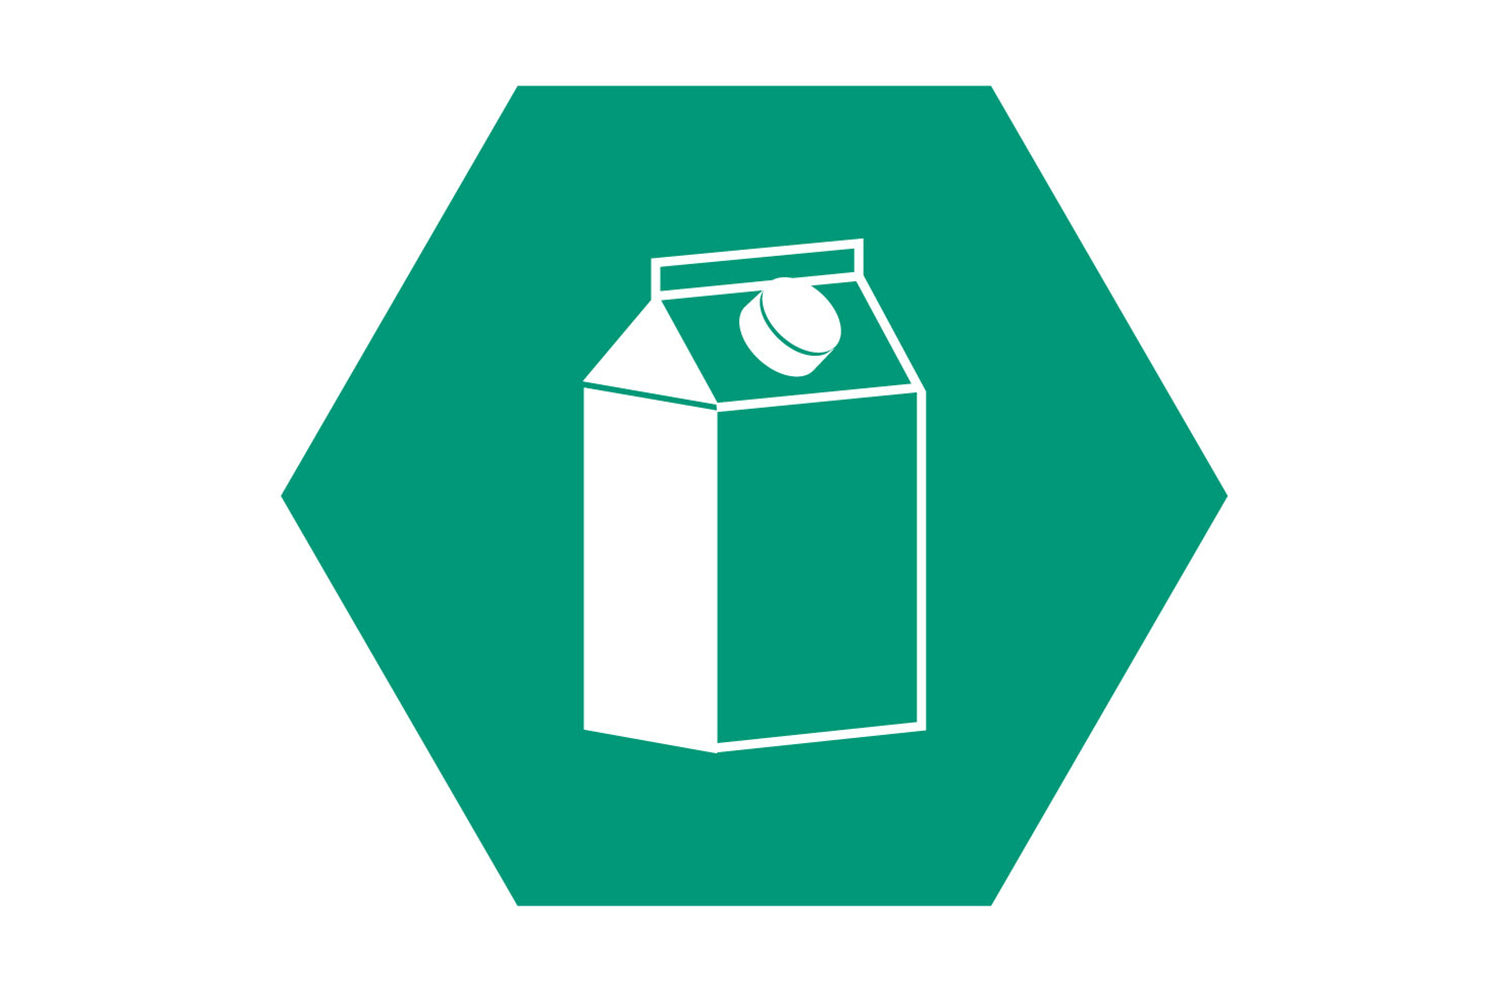 Hexagonal icon with milk carton represents the Packaging business field